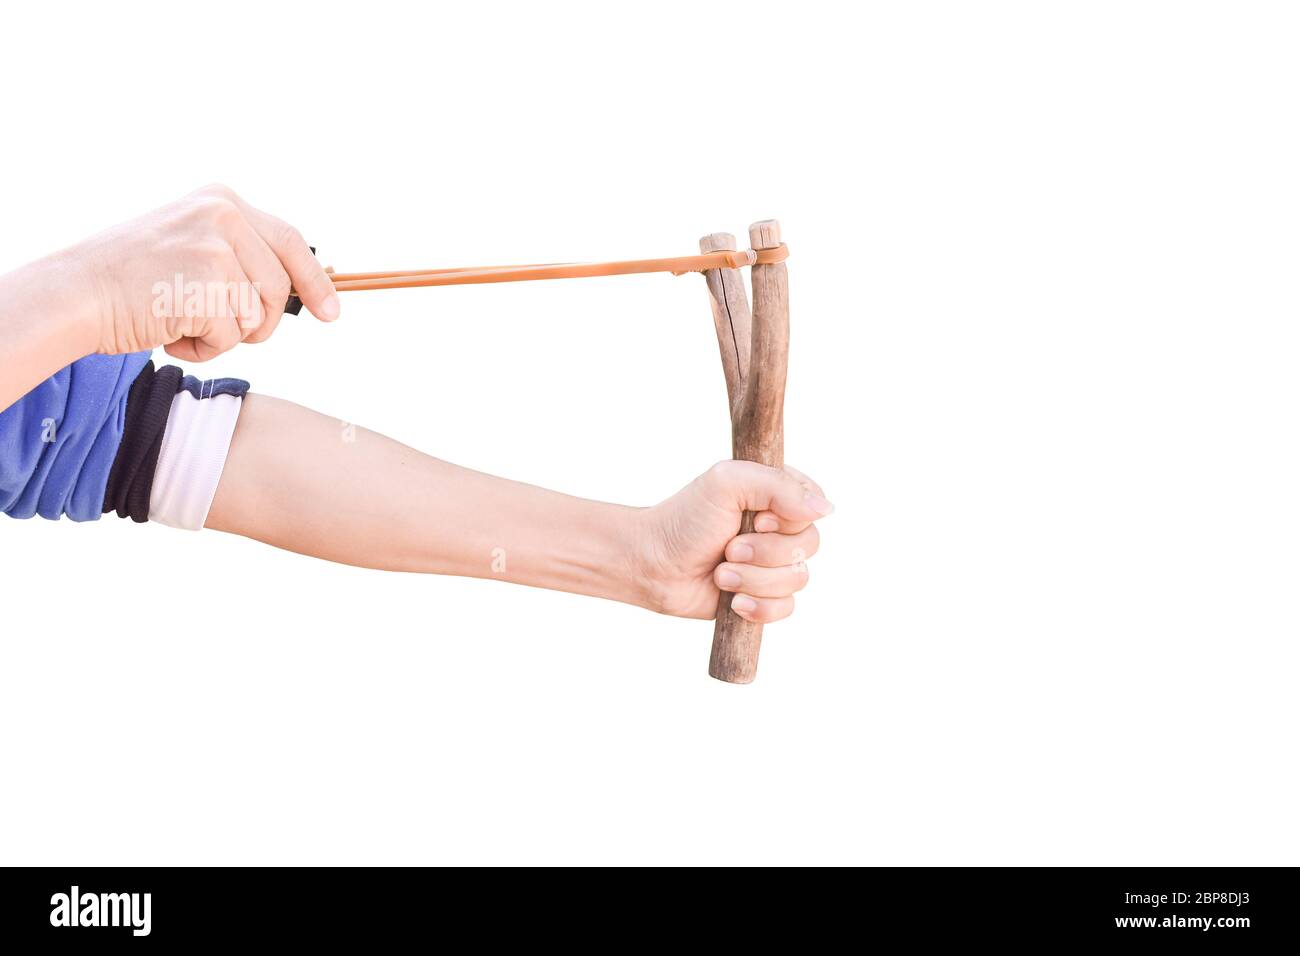 Hand holding aiming Slingshot, Isolated on white background with clipping path. Stock Photo